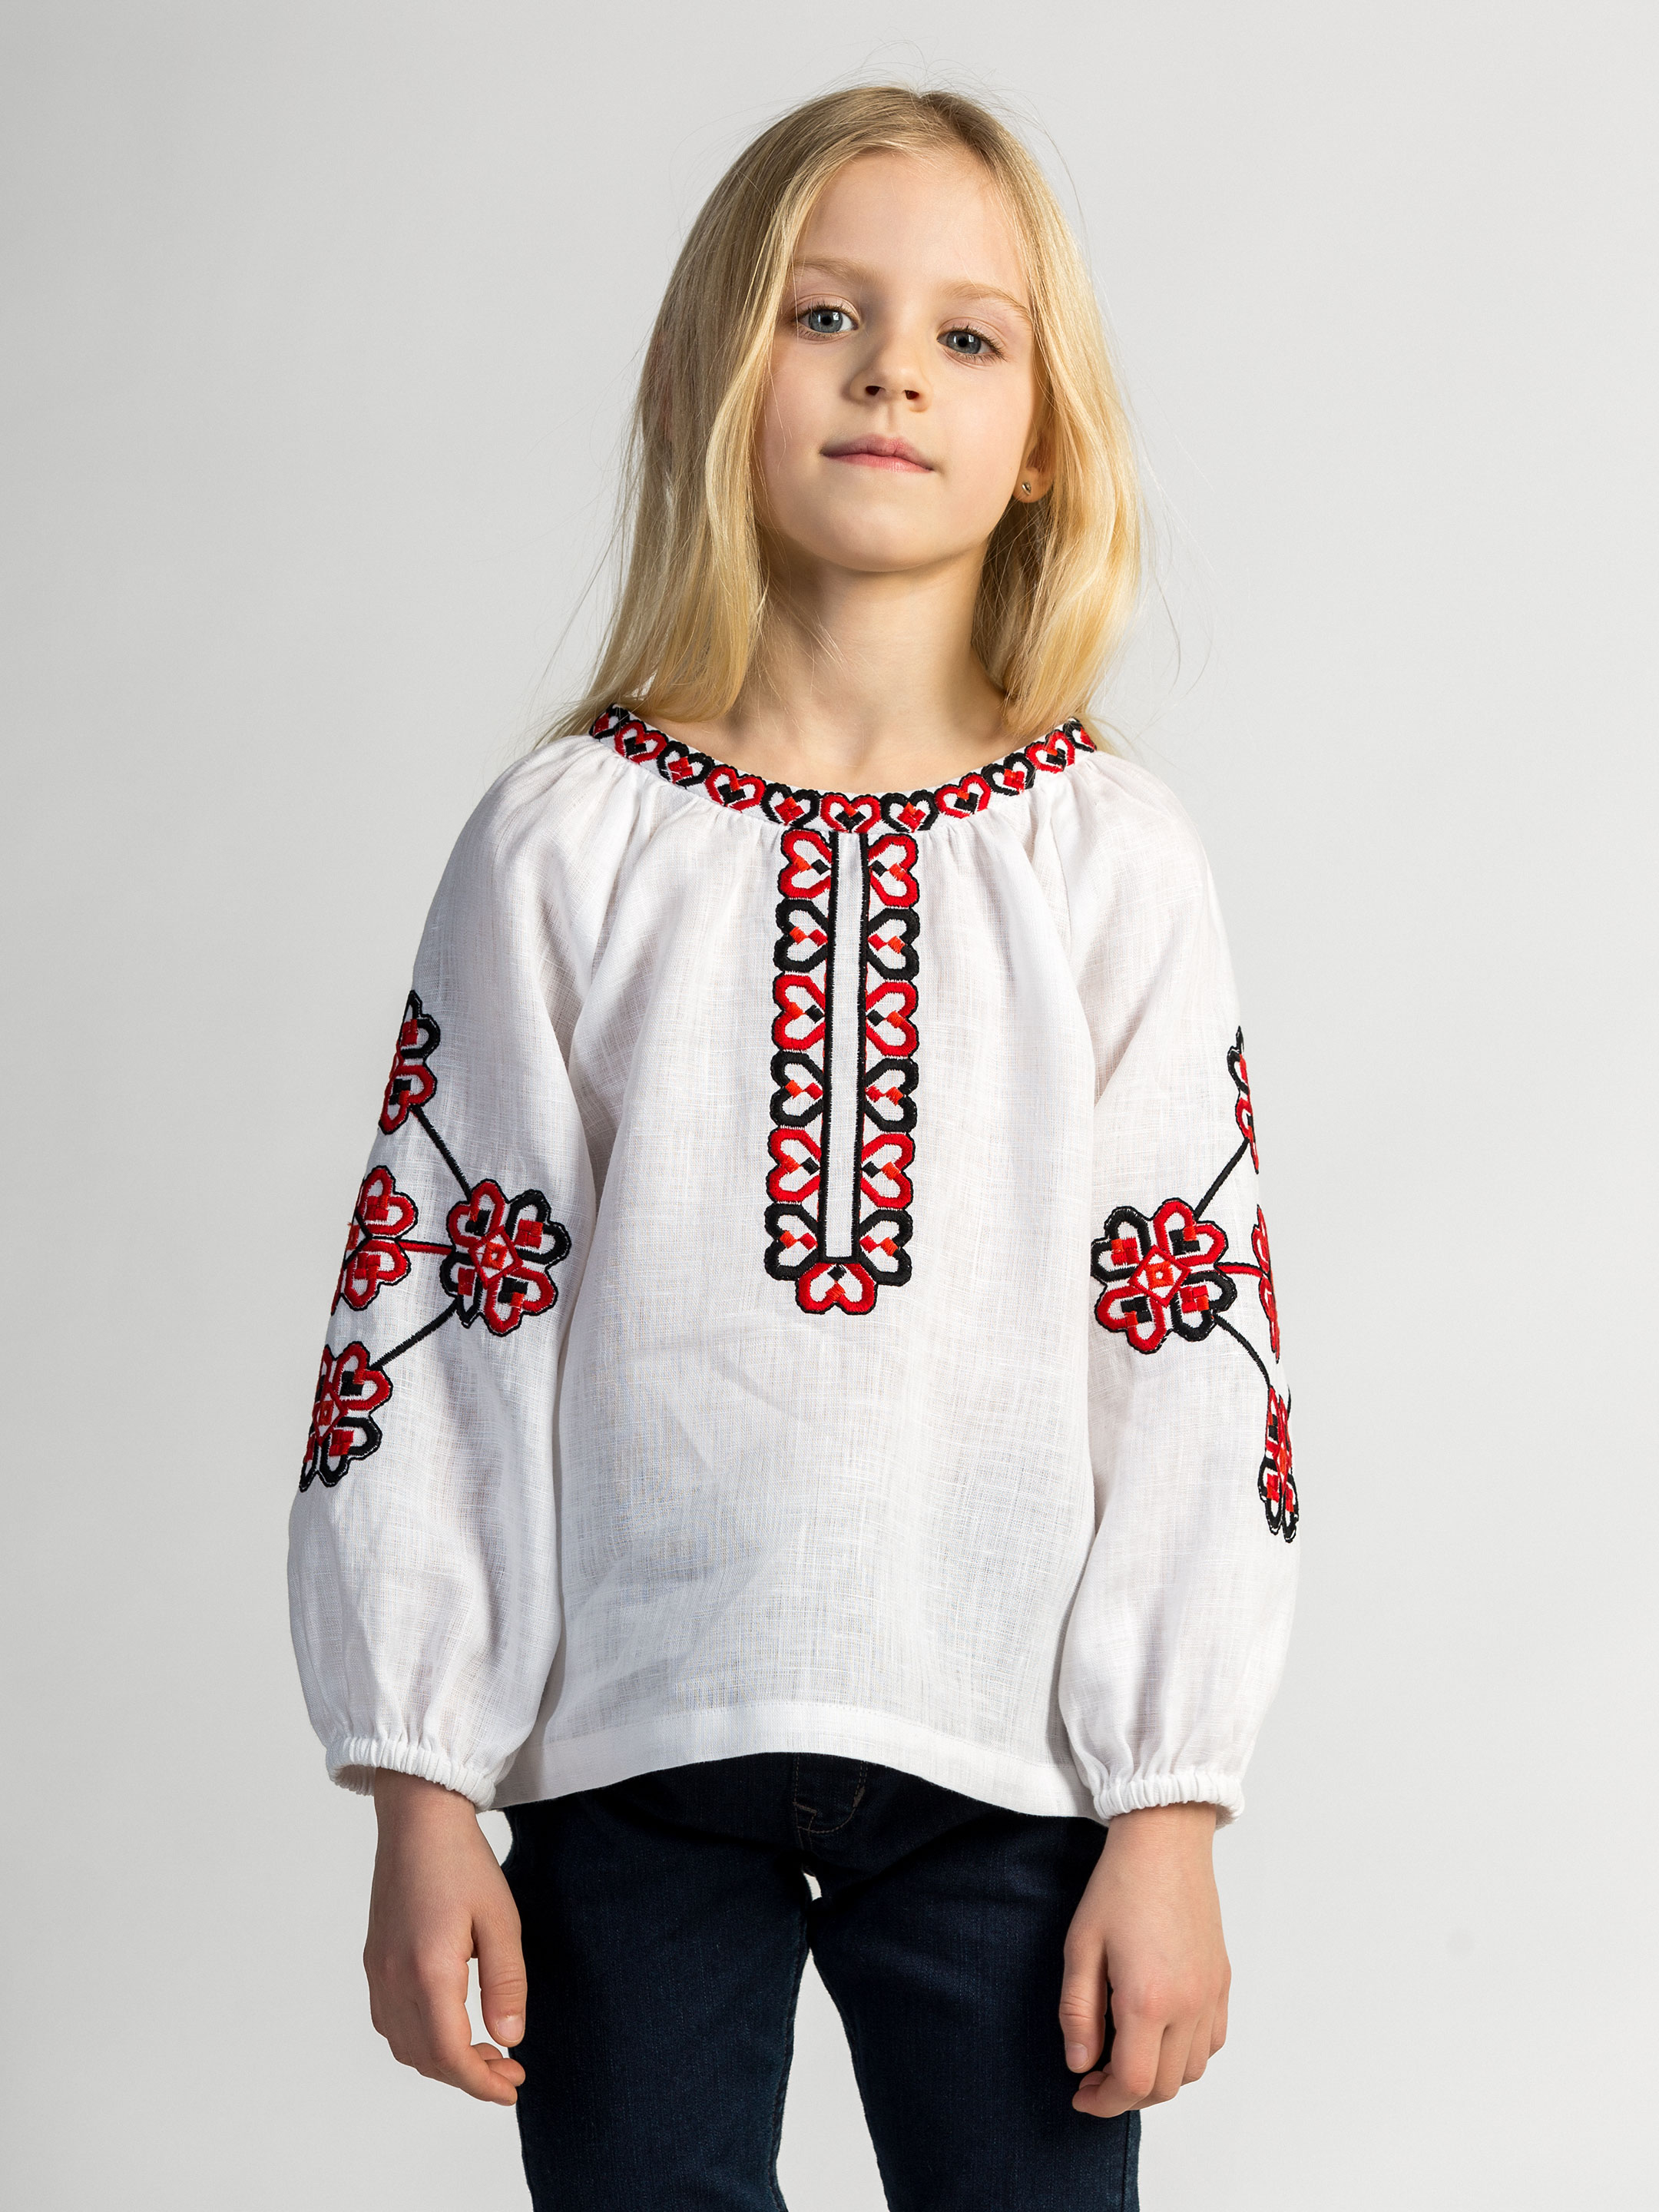 Embroidered shirt for girls Red Heart - photo 1